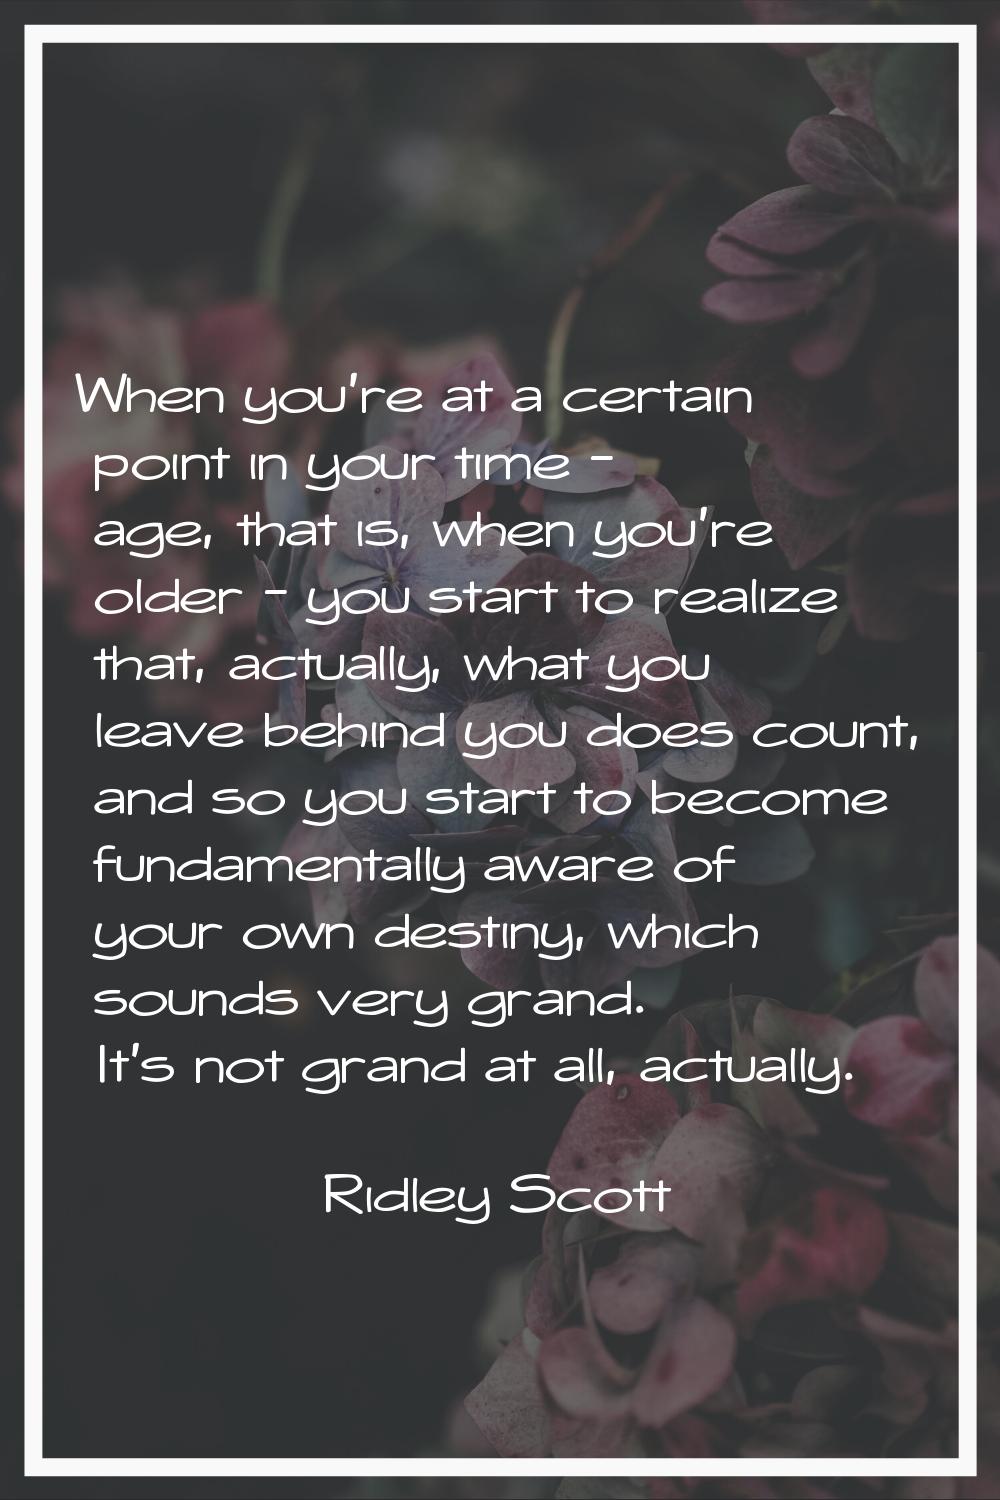 When you're at a certain point in your time - age, that is, when you're older - you start to realiz